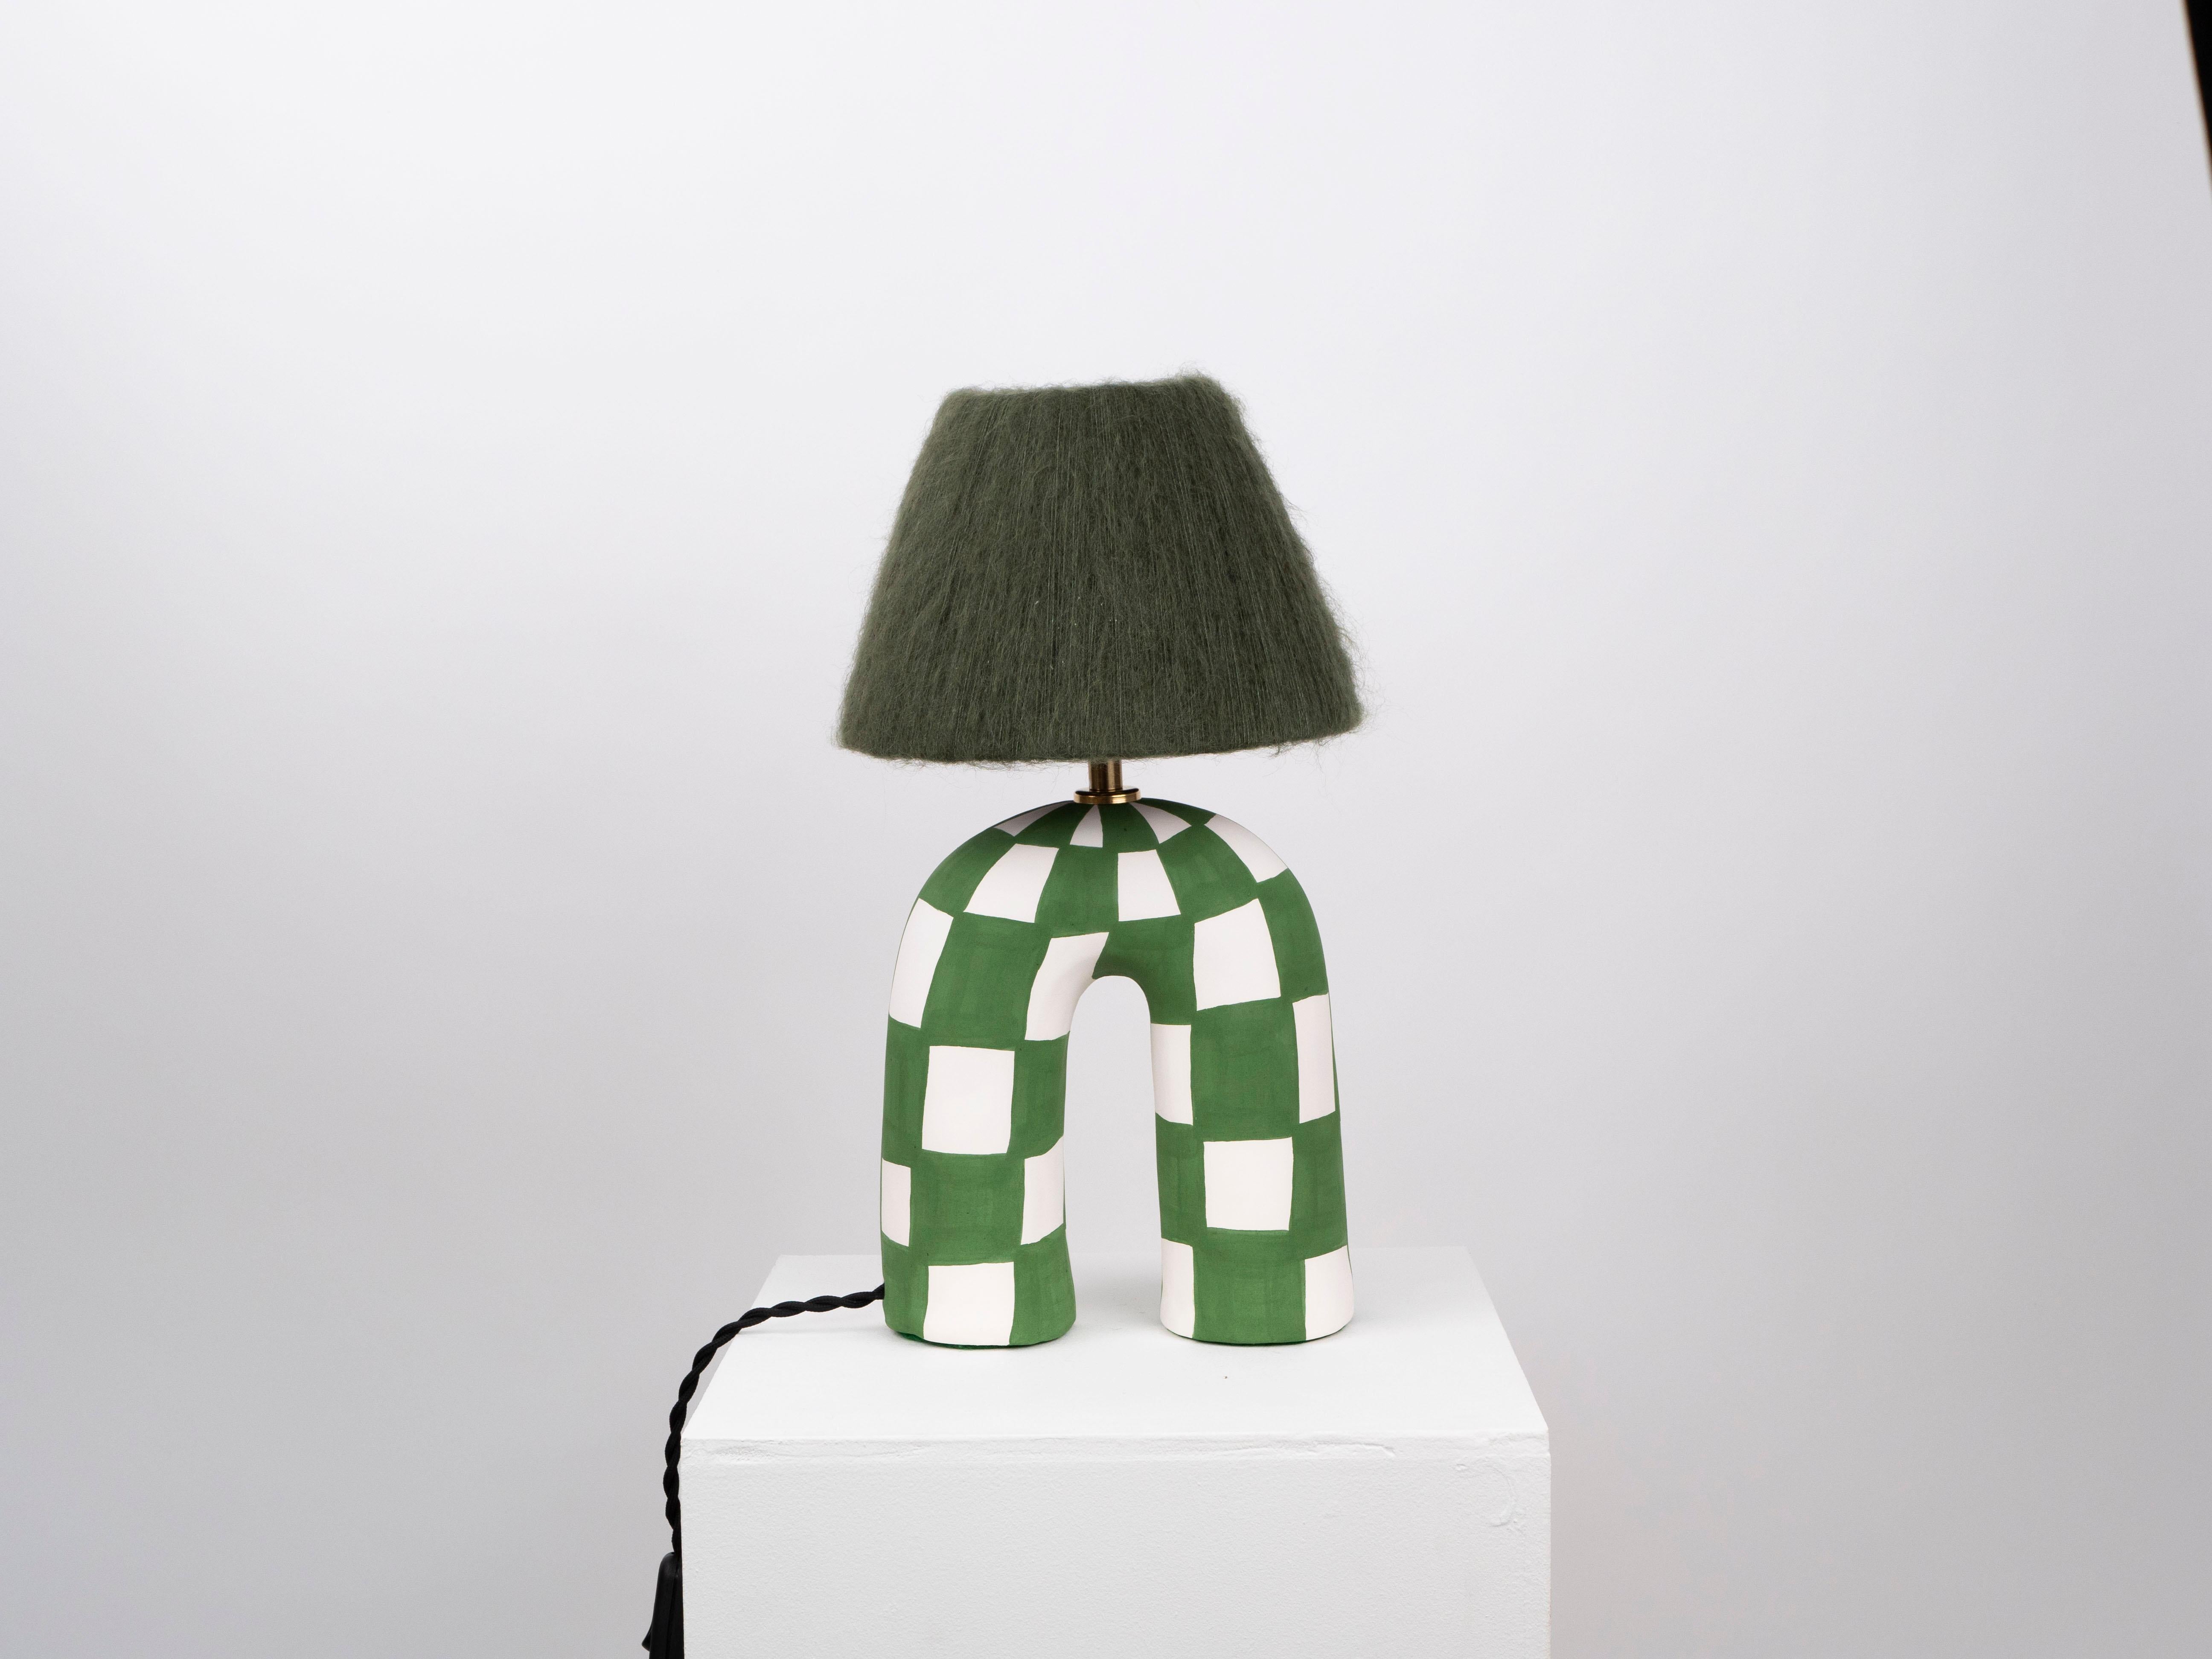 White and Green Checkerboard Pattern with a Matte Finish and Green Mohair Shade

Estimated processing time is 2 weeks from order confirmation

Pictured with a Mini Globe LED E27 Bulb. Bulb not included

To pair this base with a shade in an